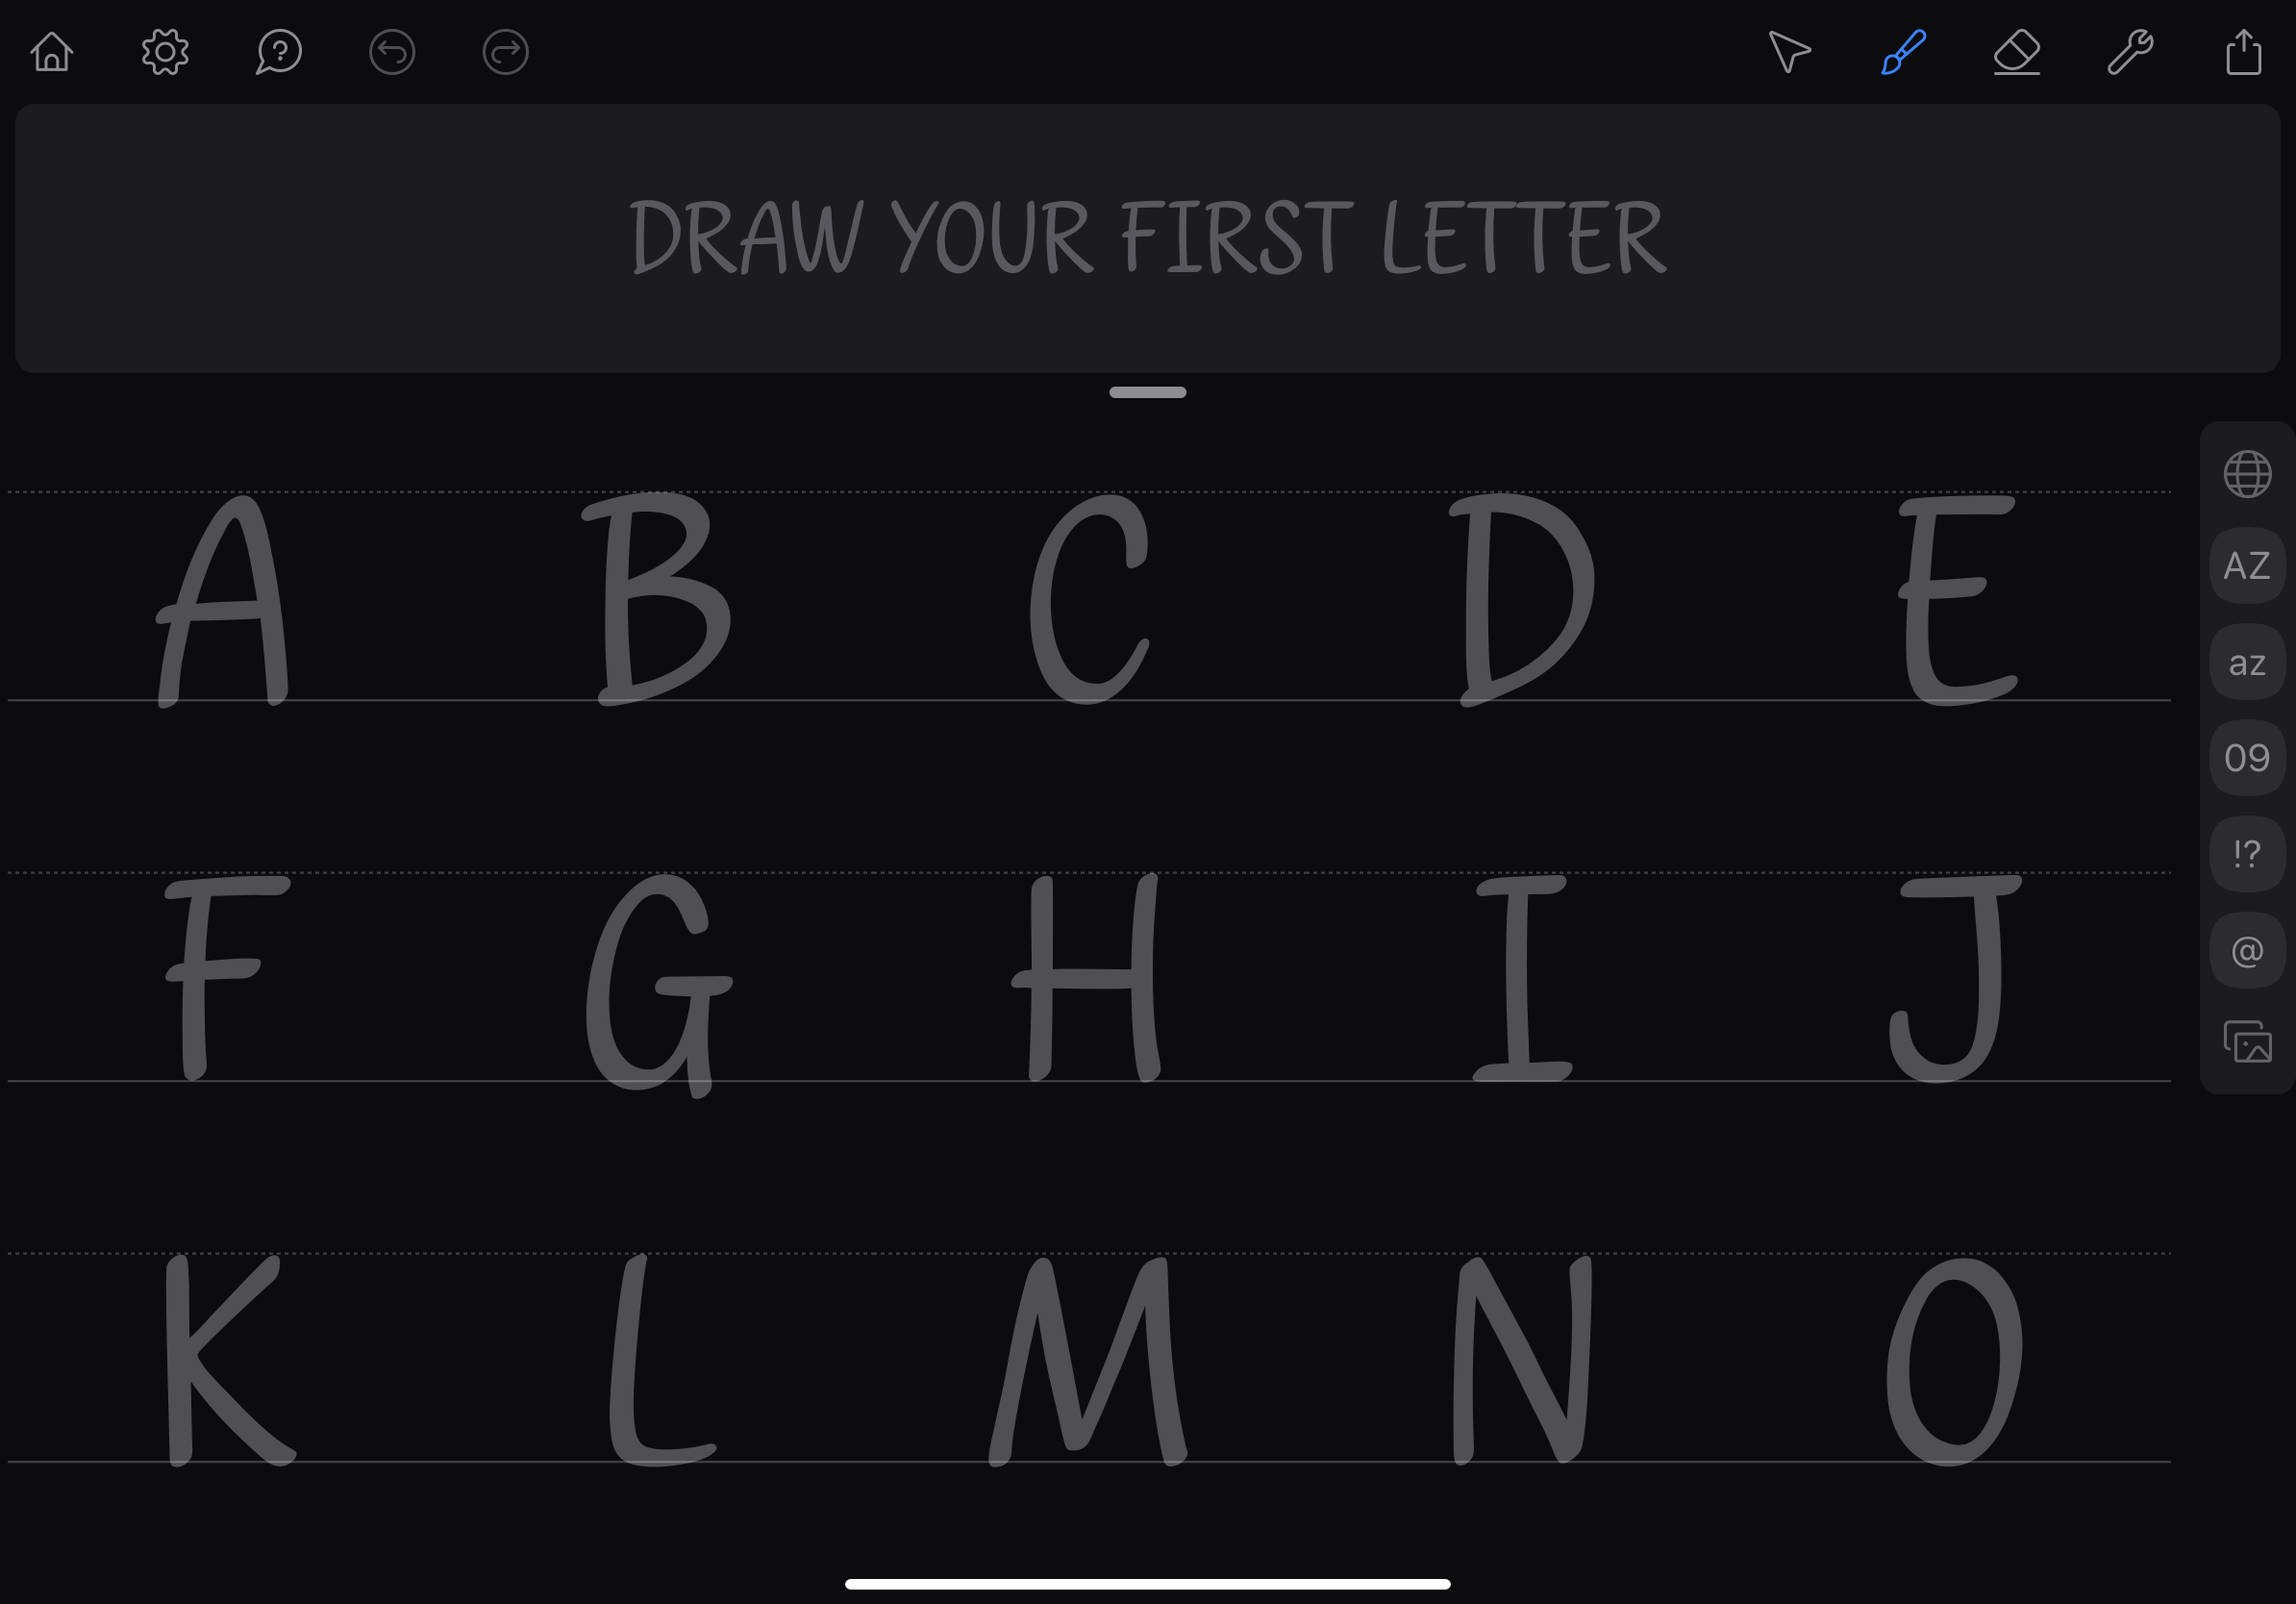 The handwriting template provided in the Fontself app, showing the alphabet in grayed out letters.